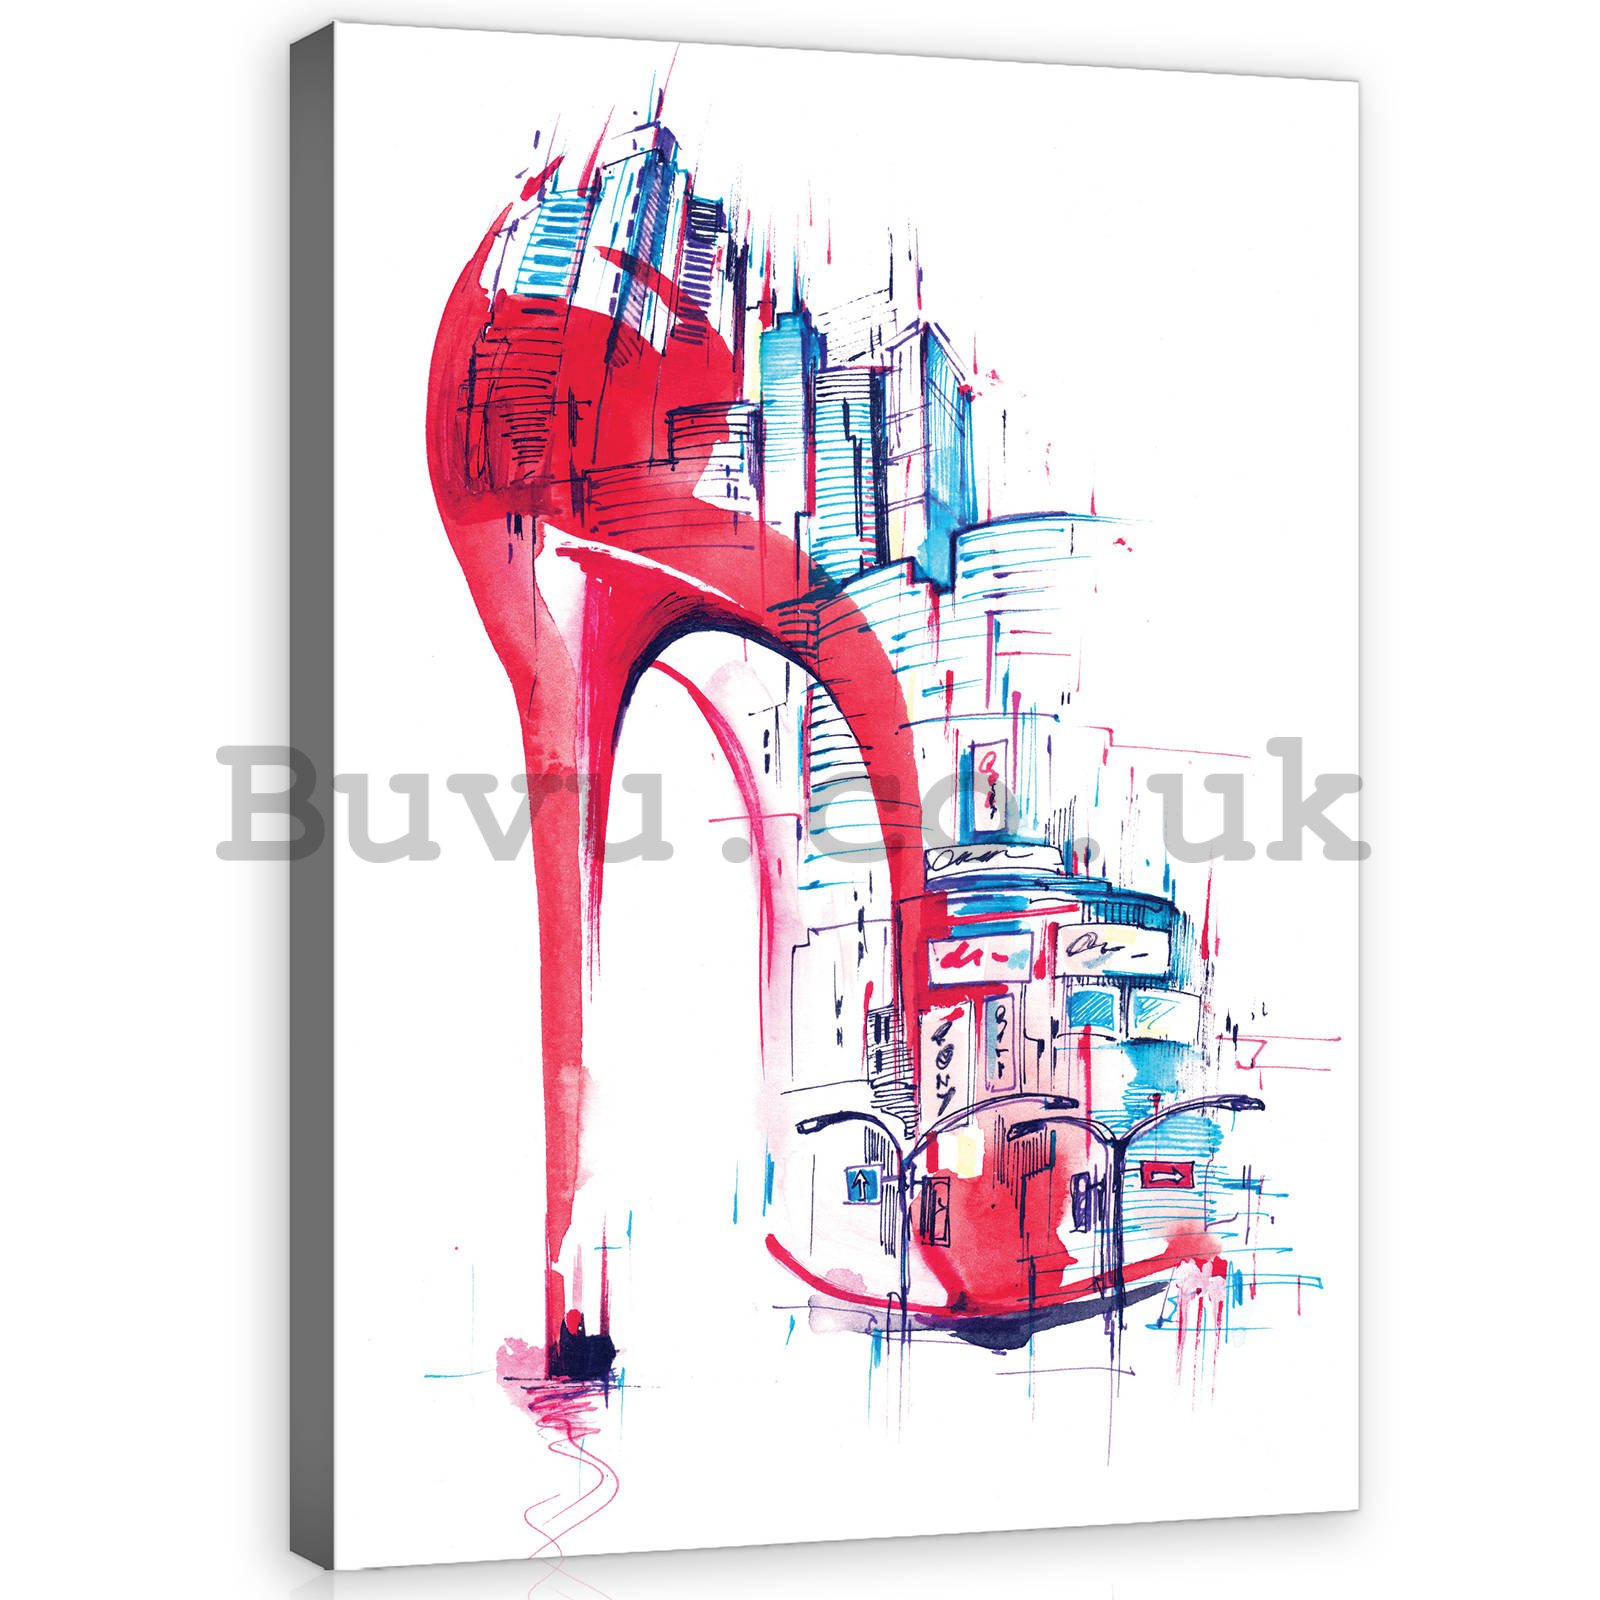 Painting on canvas: Shoe (abstract painting) - 80x60 cm